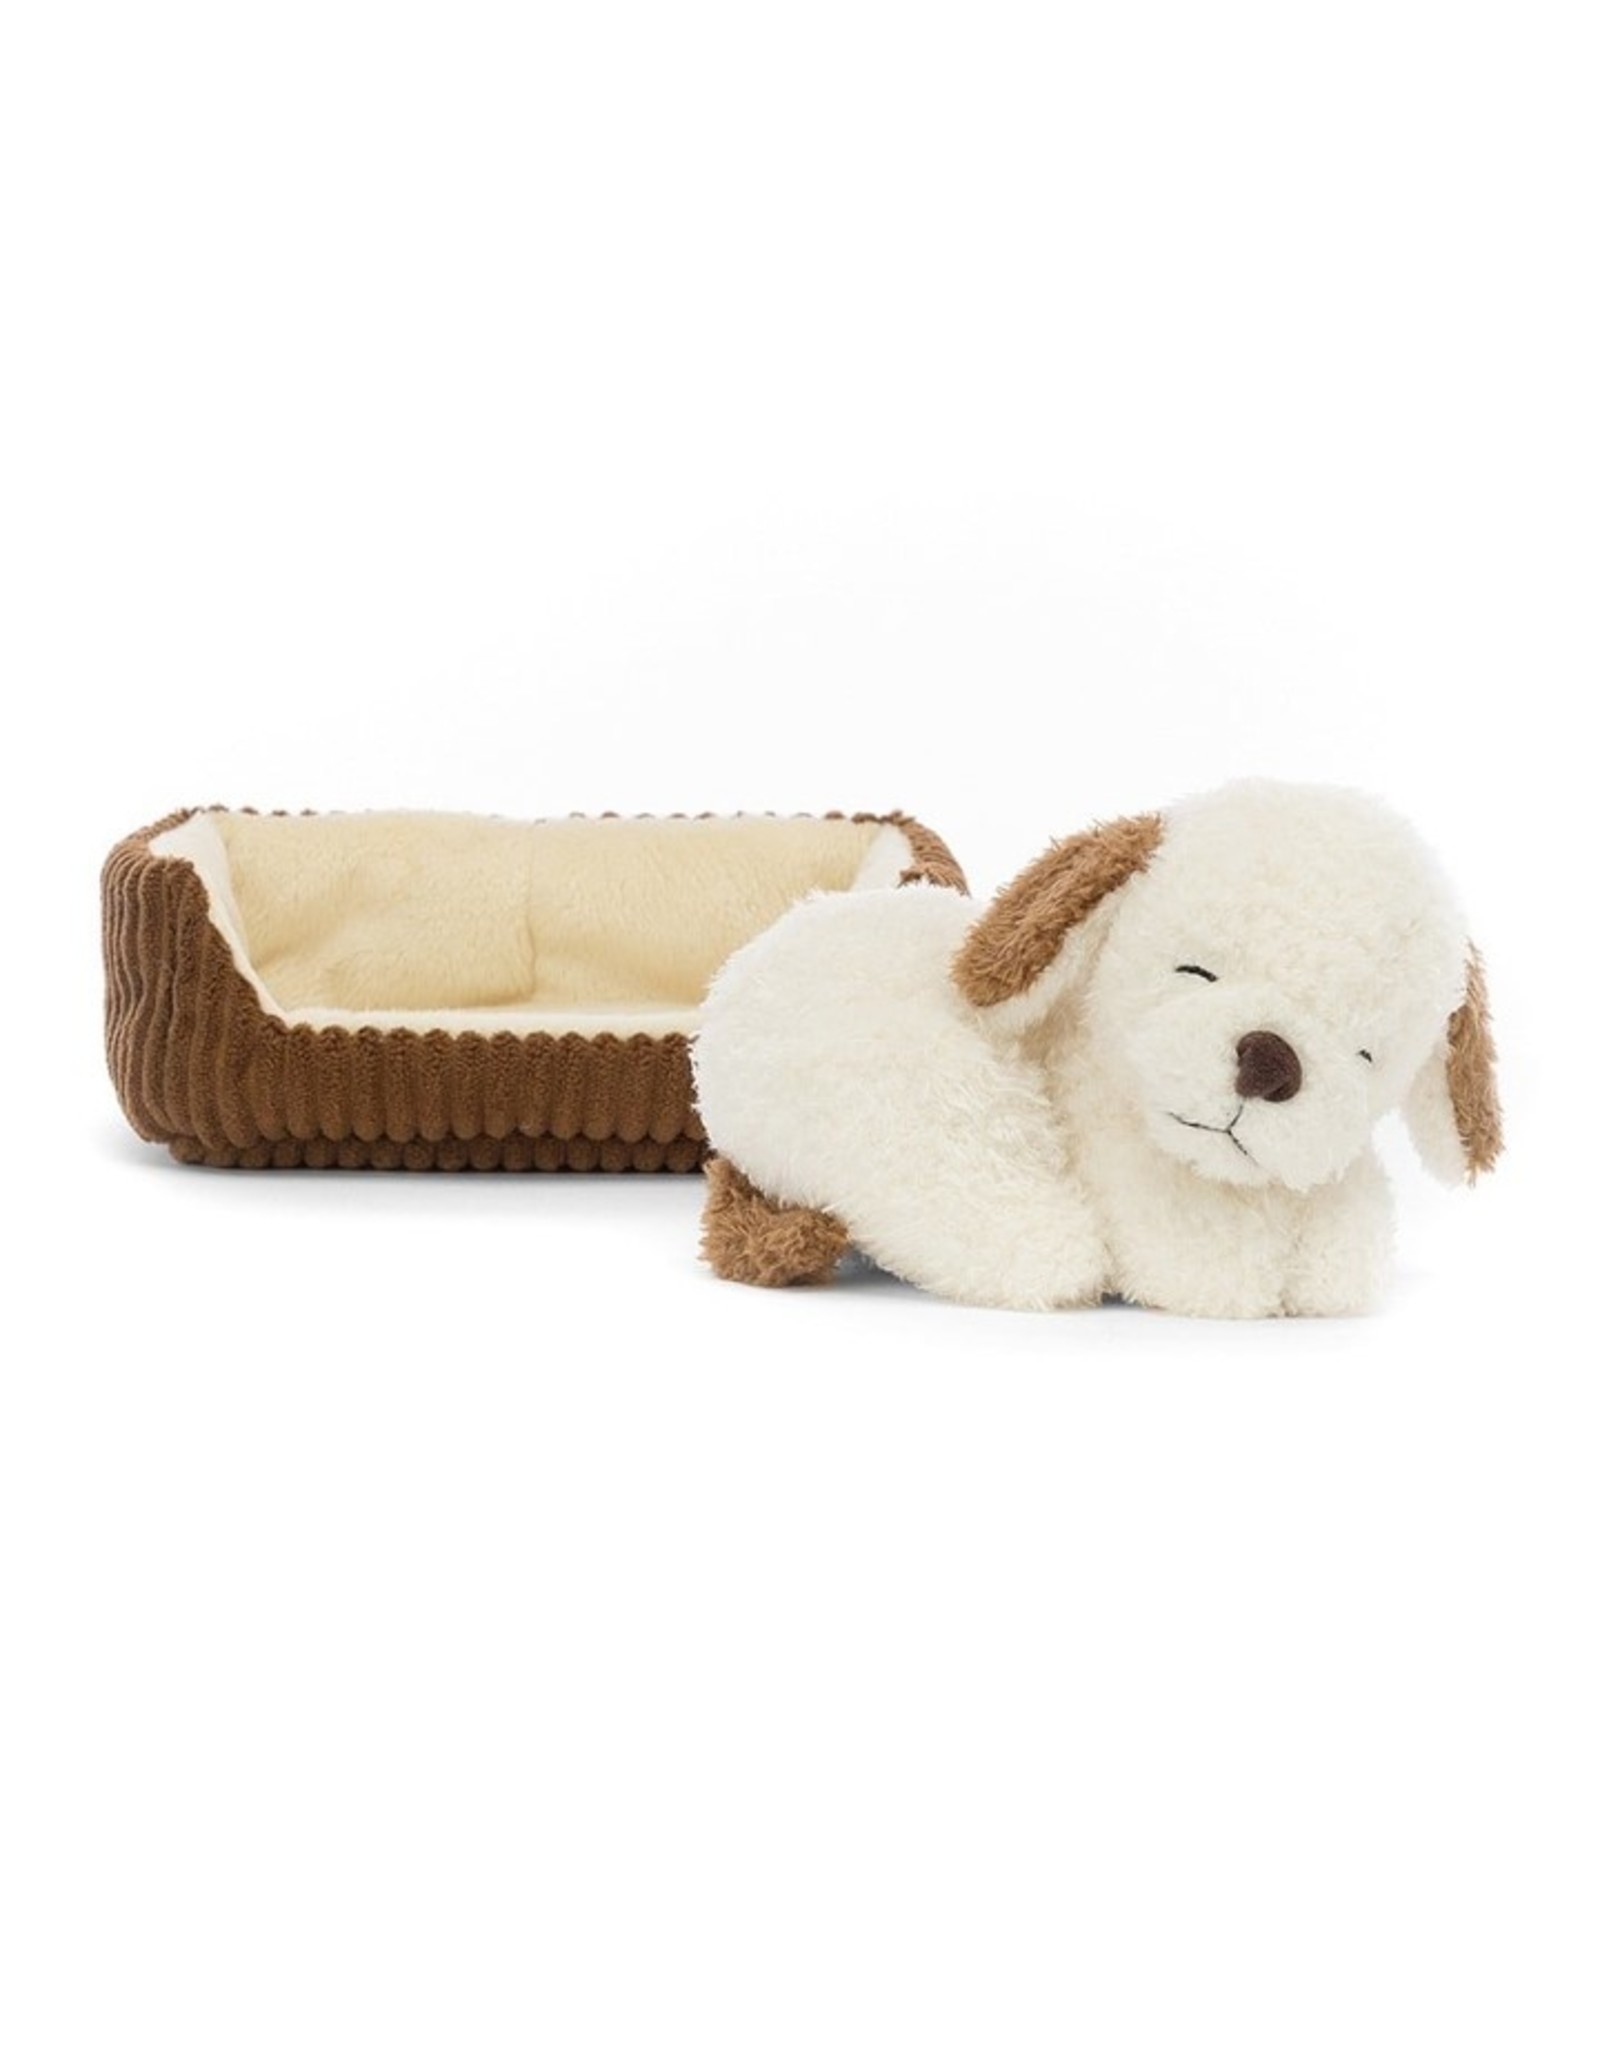 Jellycat Napping Nipper Dog